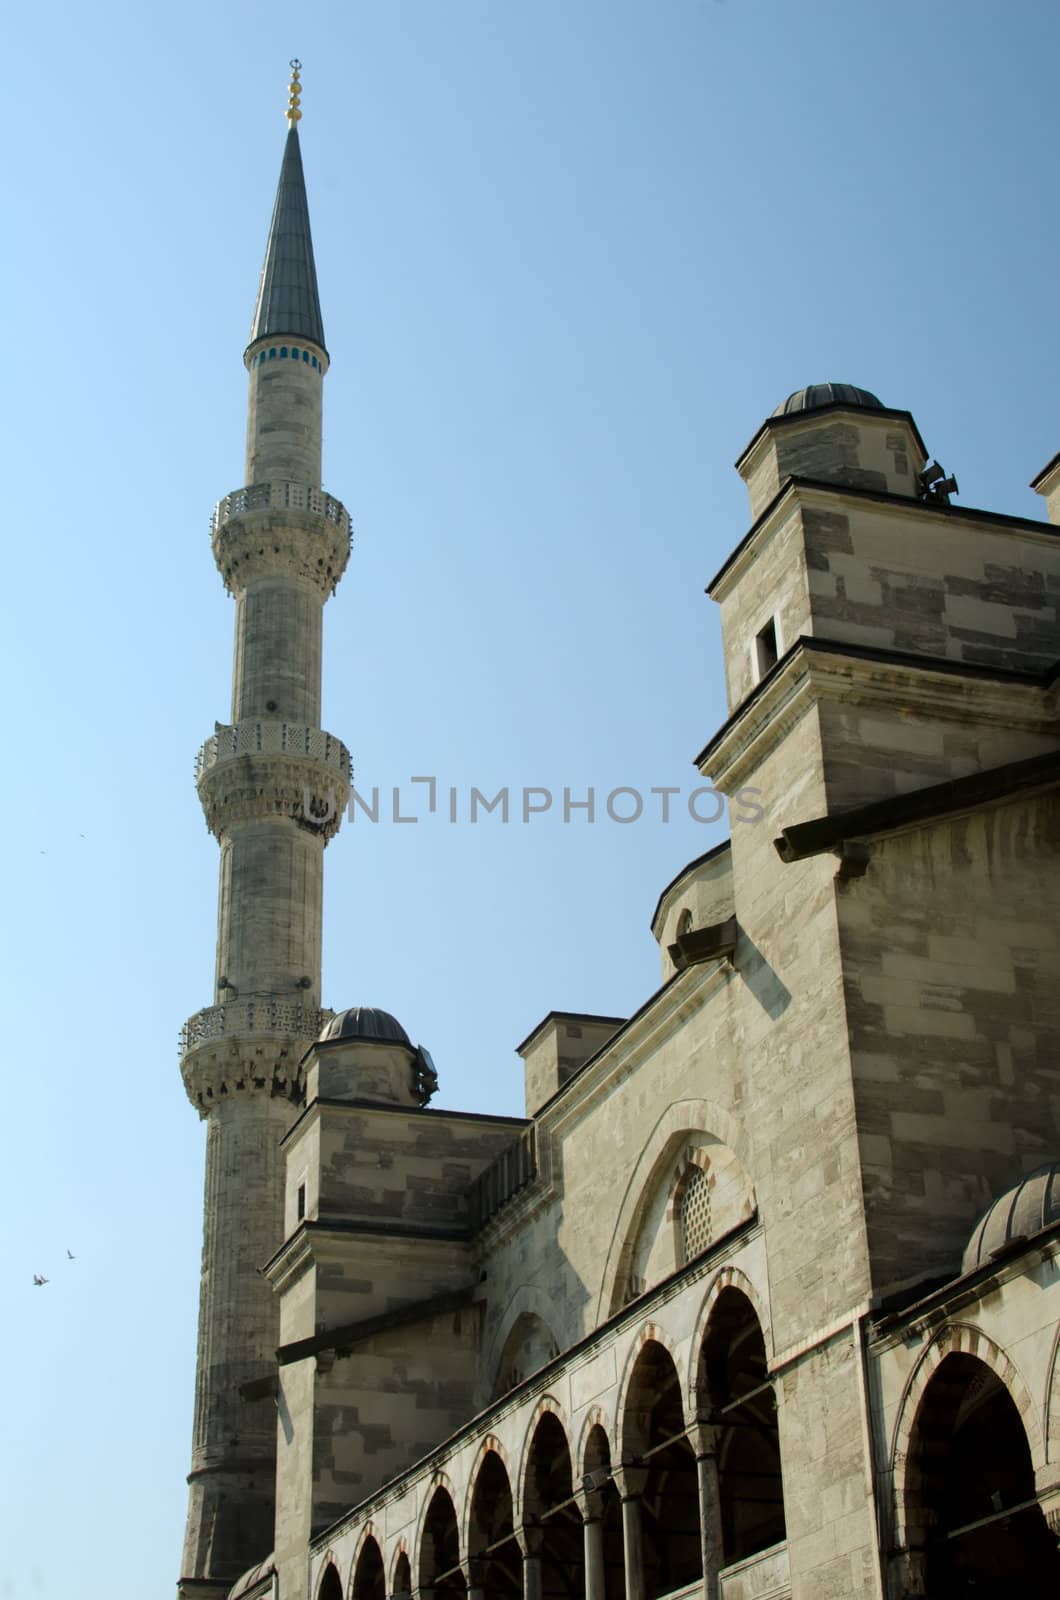 Blue Mosque of istanbul
